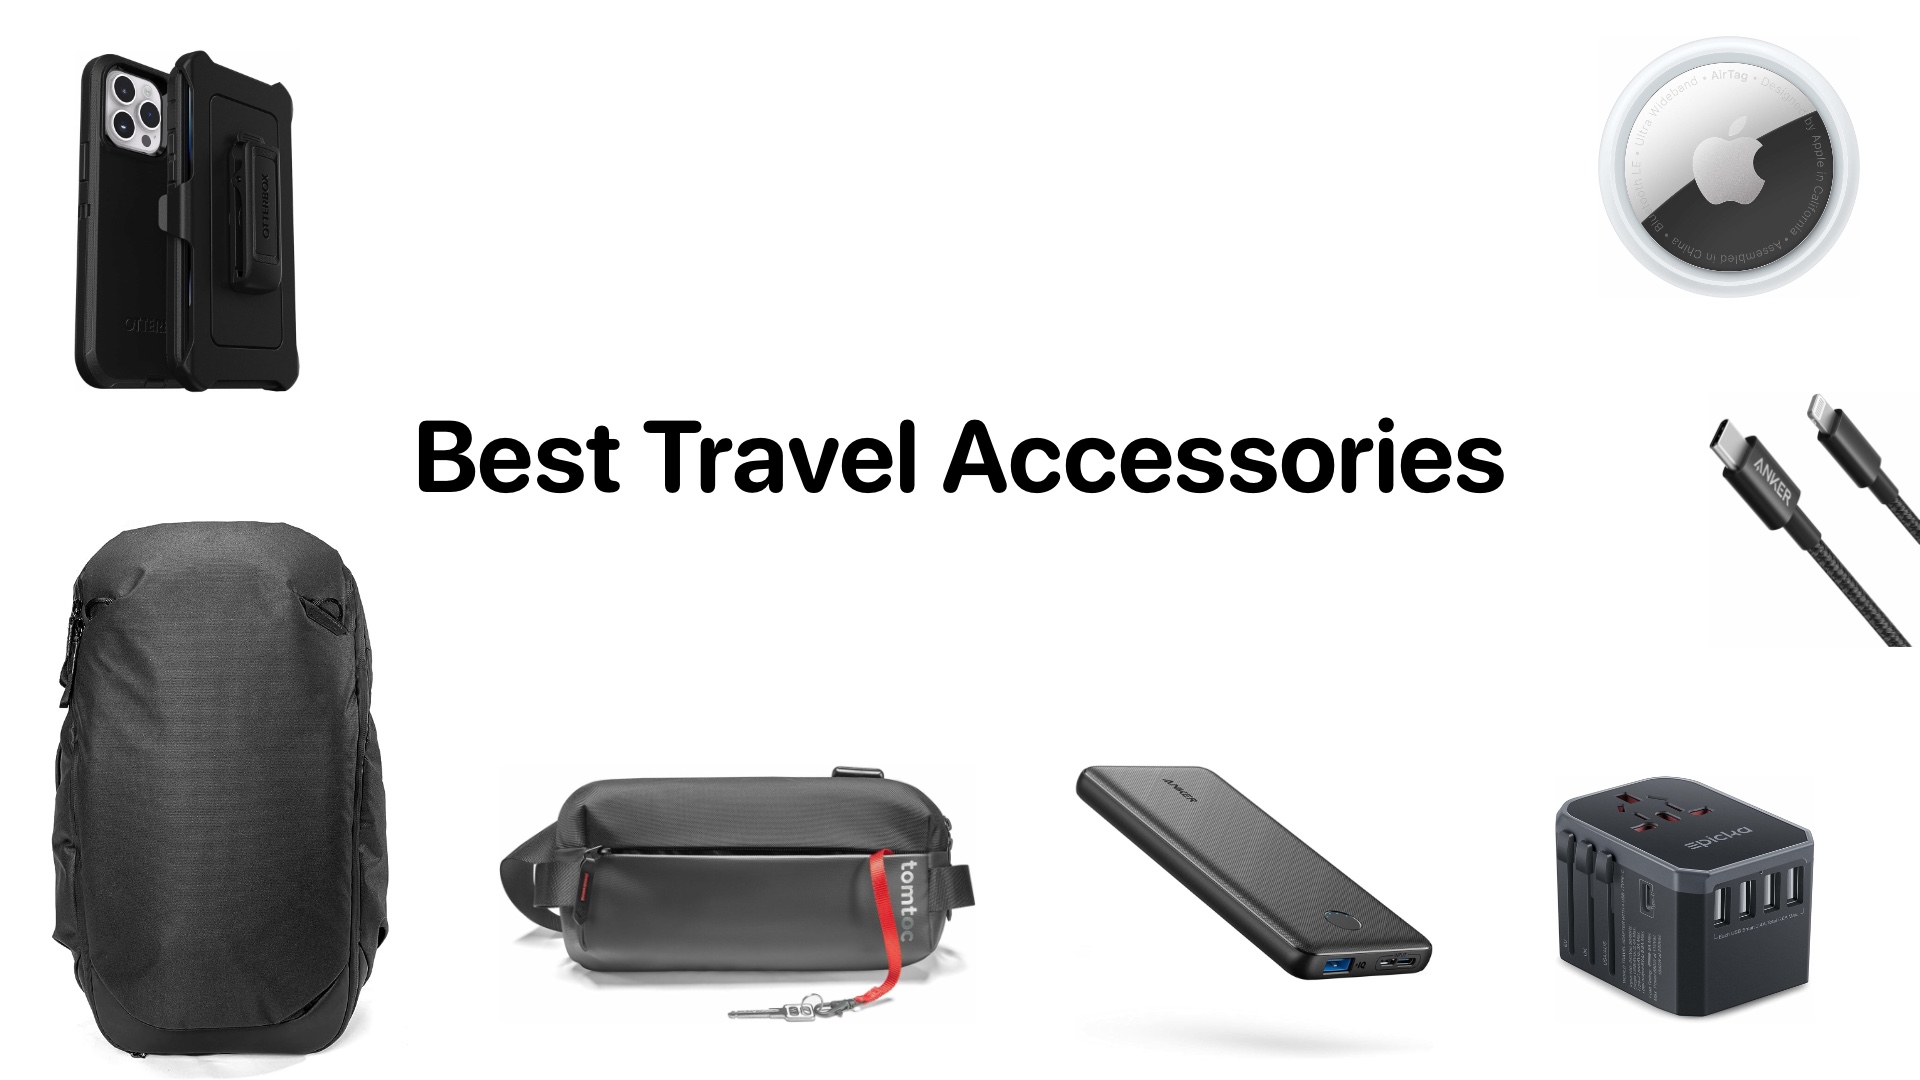 Best Travel Accessories Every iPhone Users Should Own - iOS Hacker